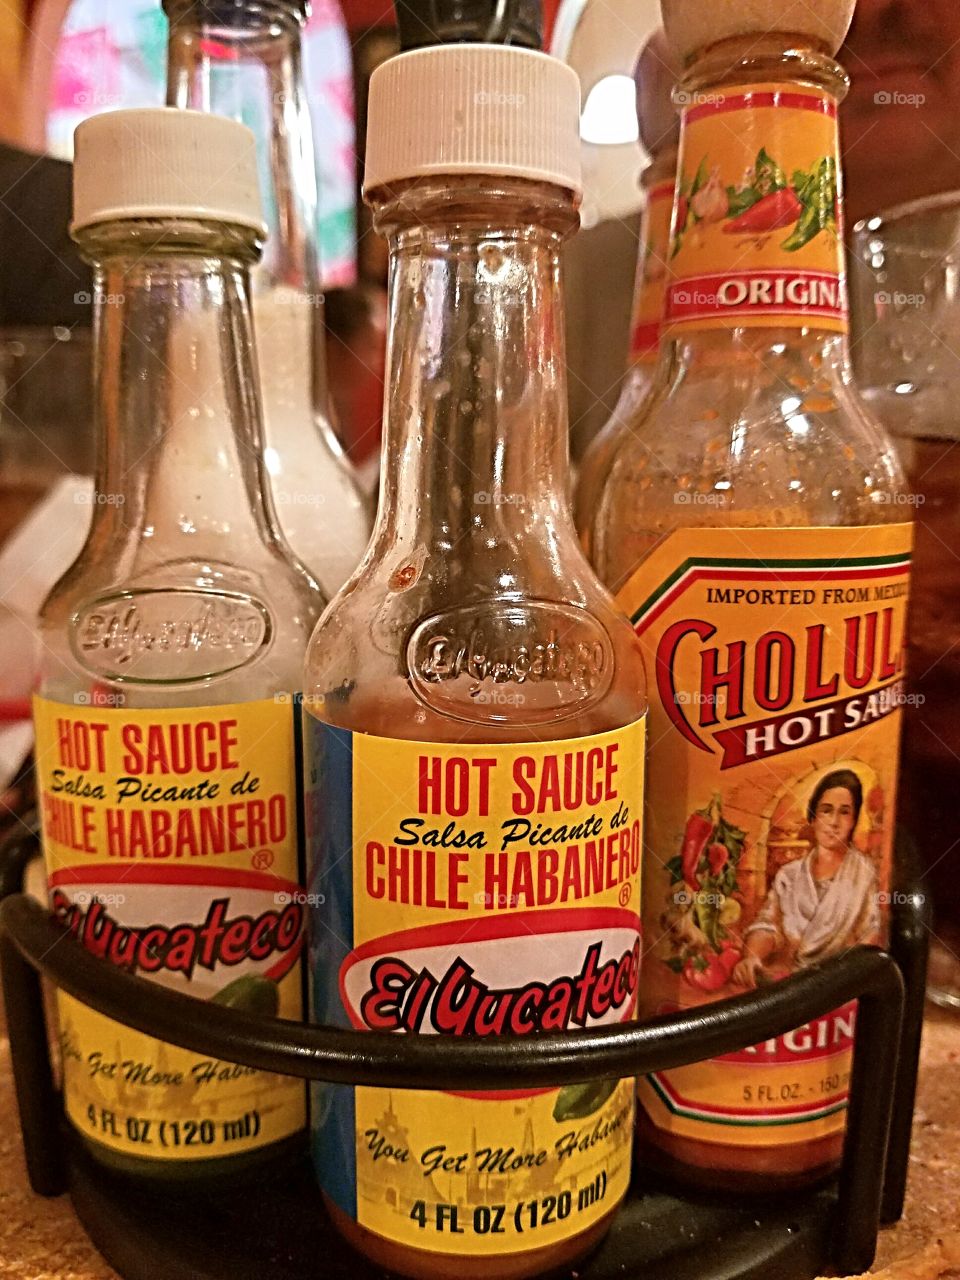 Hot sauce condiments at Mexican restaurant